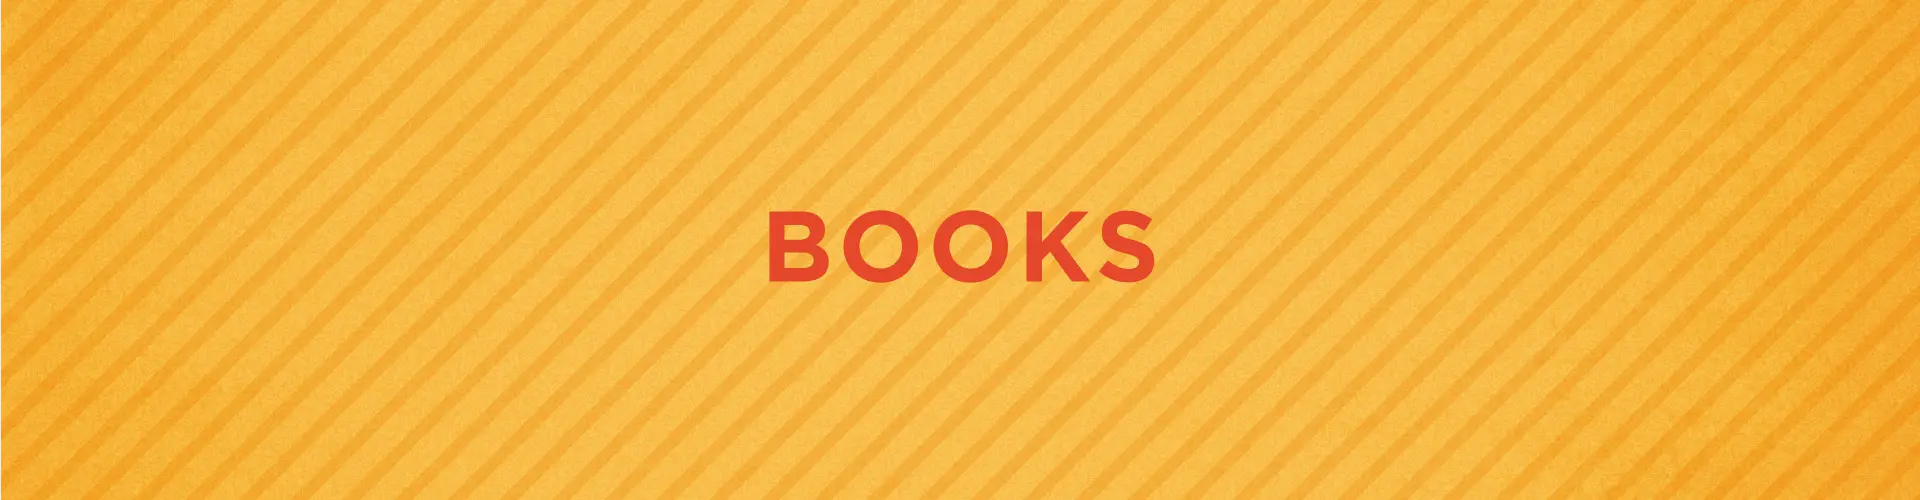 Resources-Background-books.png